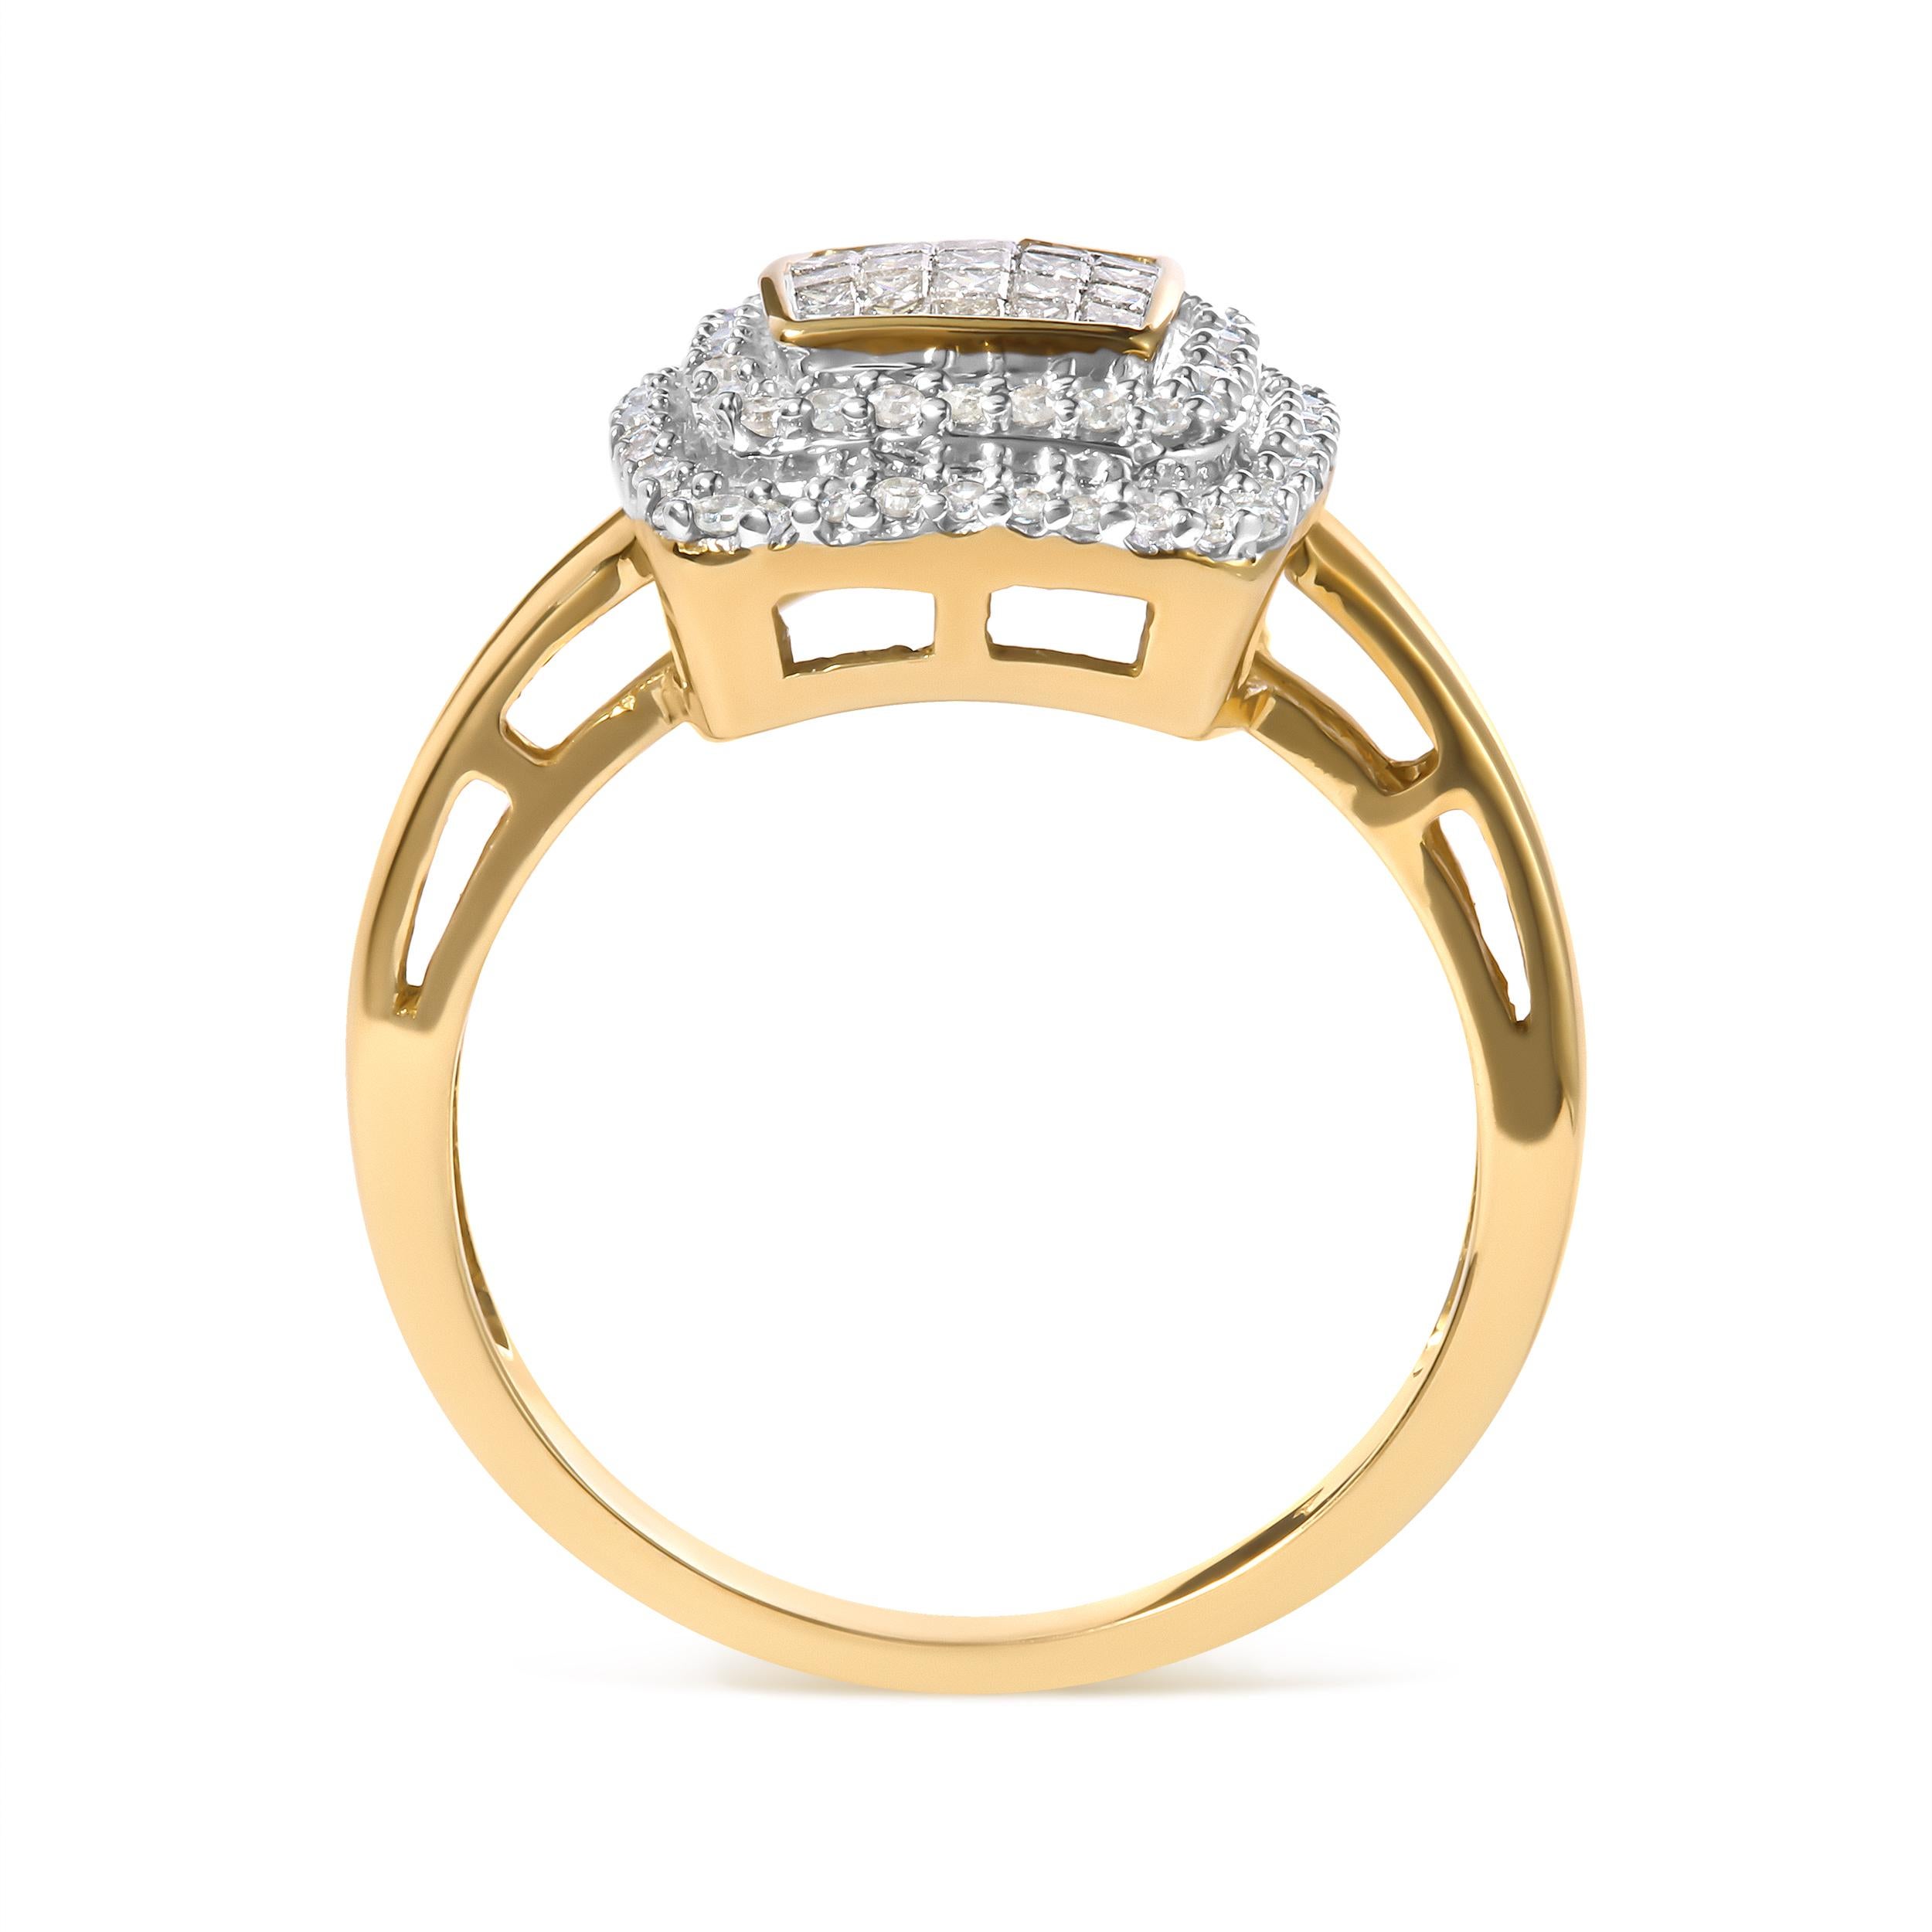 Crafted with meticulous attention to detail, this exquisite piece is a testament to the allure of natural diamonds. Within the lustrous embrace of 10K yellow gold, 98 diamonds gracefully come together to create a mesmerizing composite head and halo